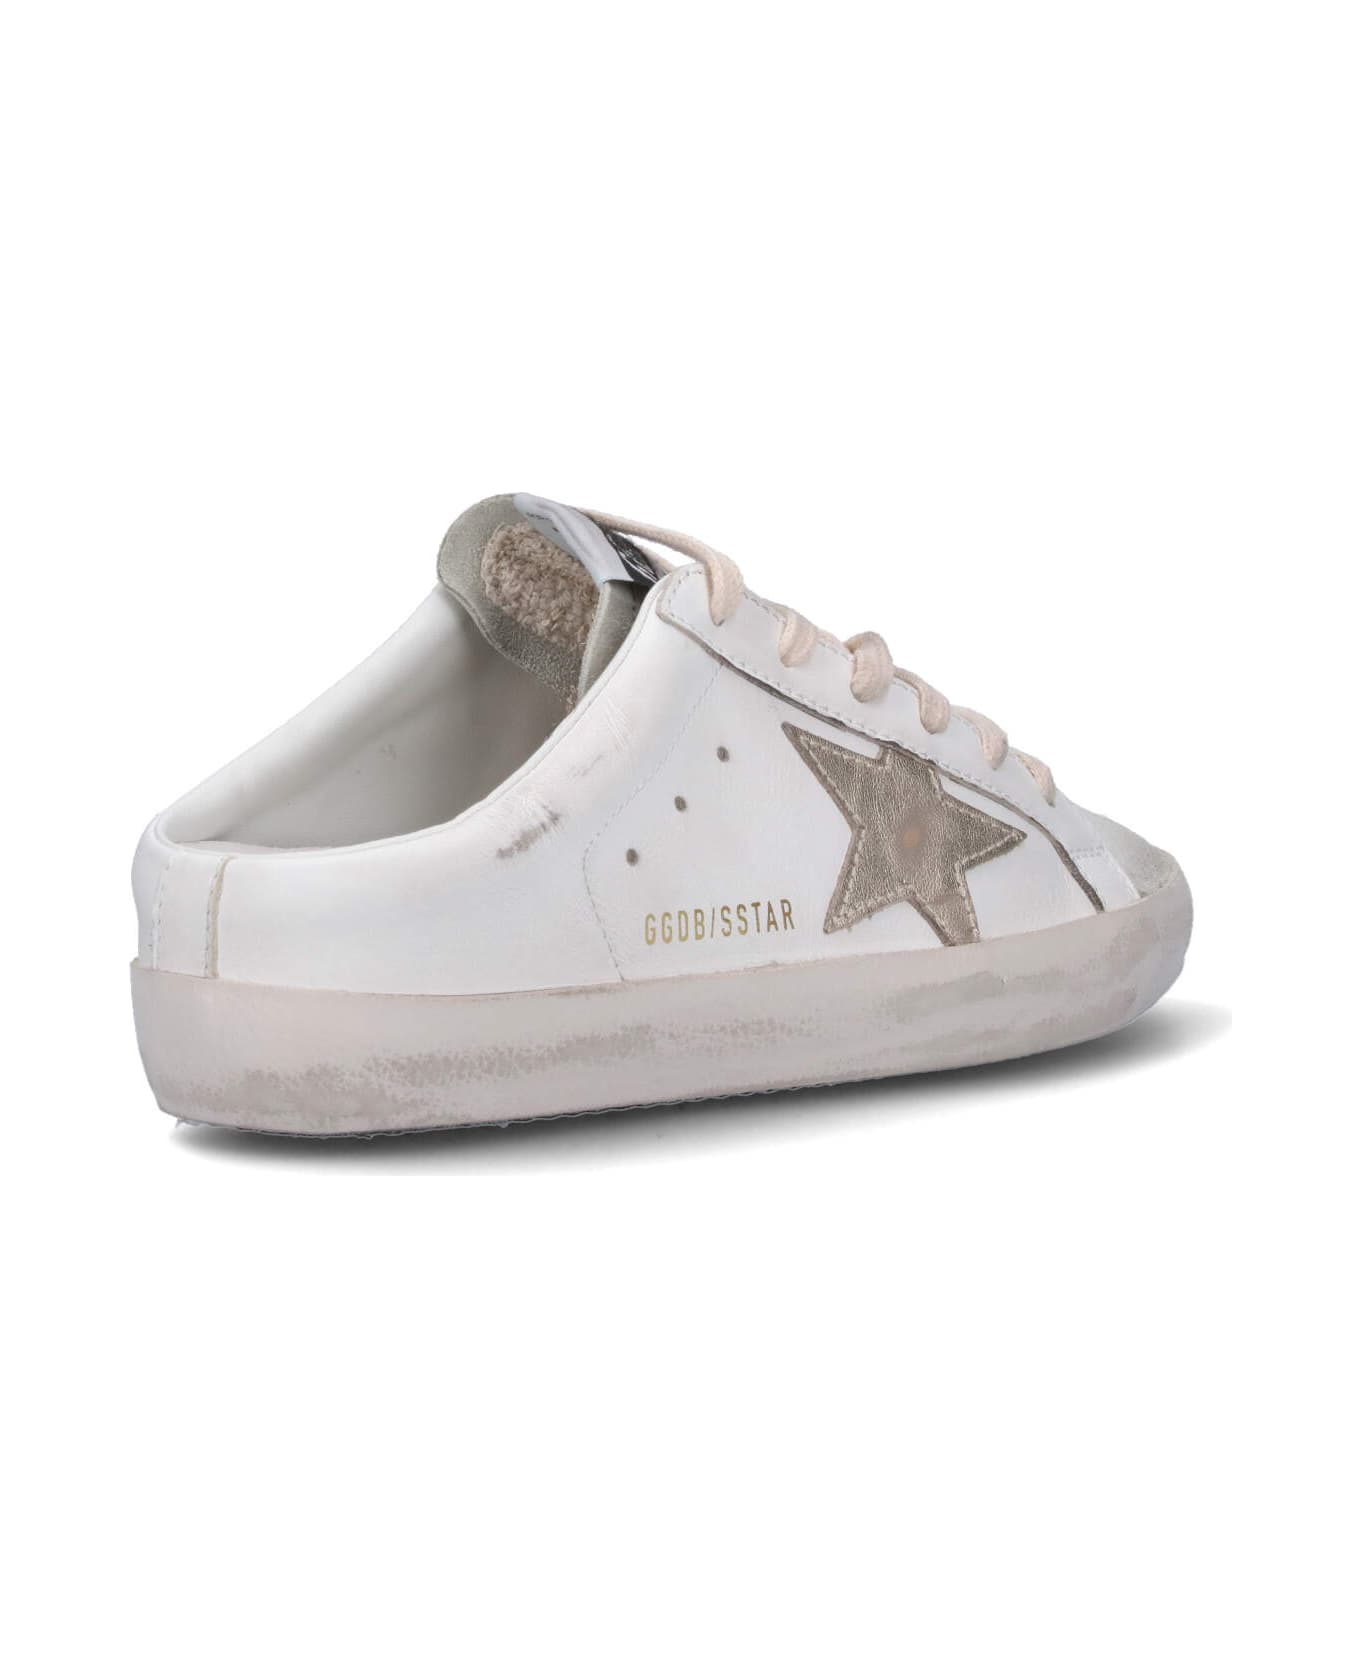 Golden Goose Superstar Sneakers In White Suede And Leather - White